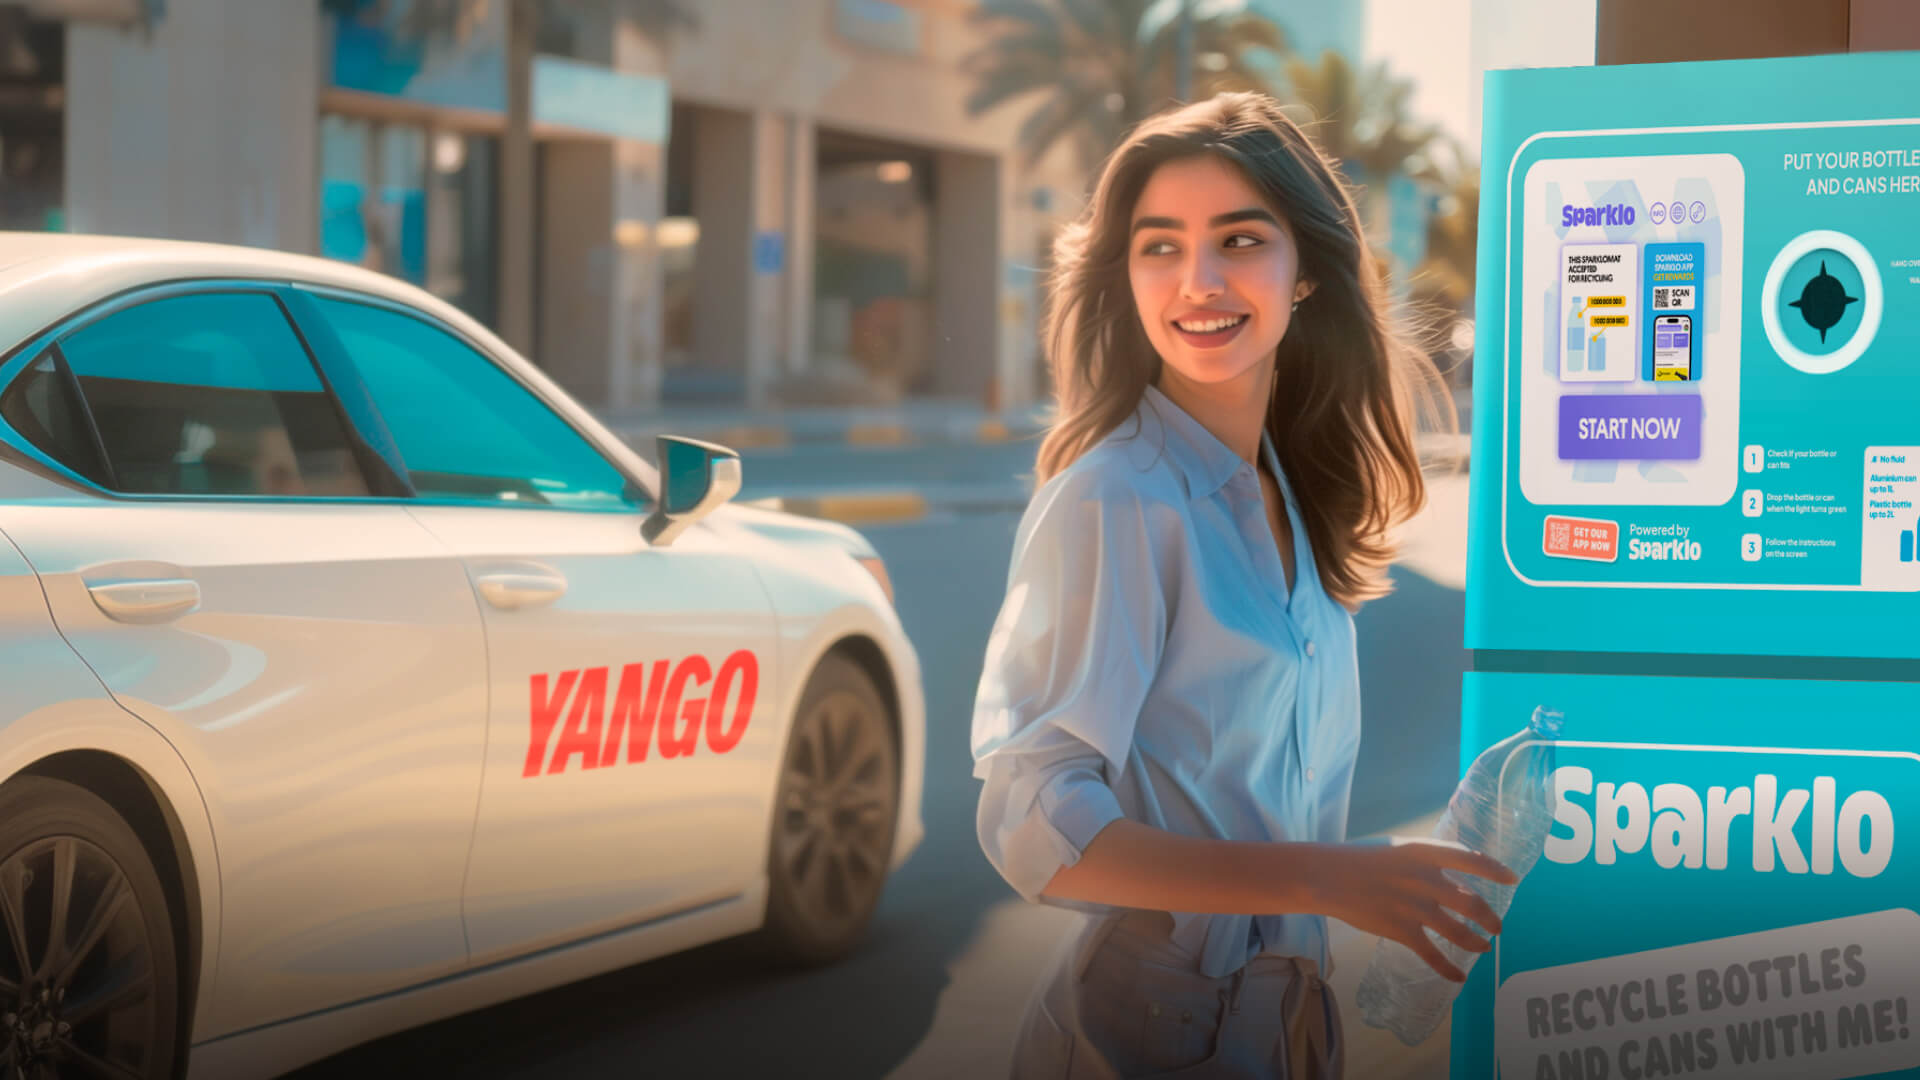 Image for Yango And Sparklo Partner To Offer Ride Discounts, Supporting UAE’s ESG Goals Through Recycling